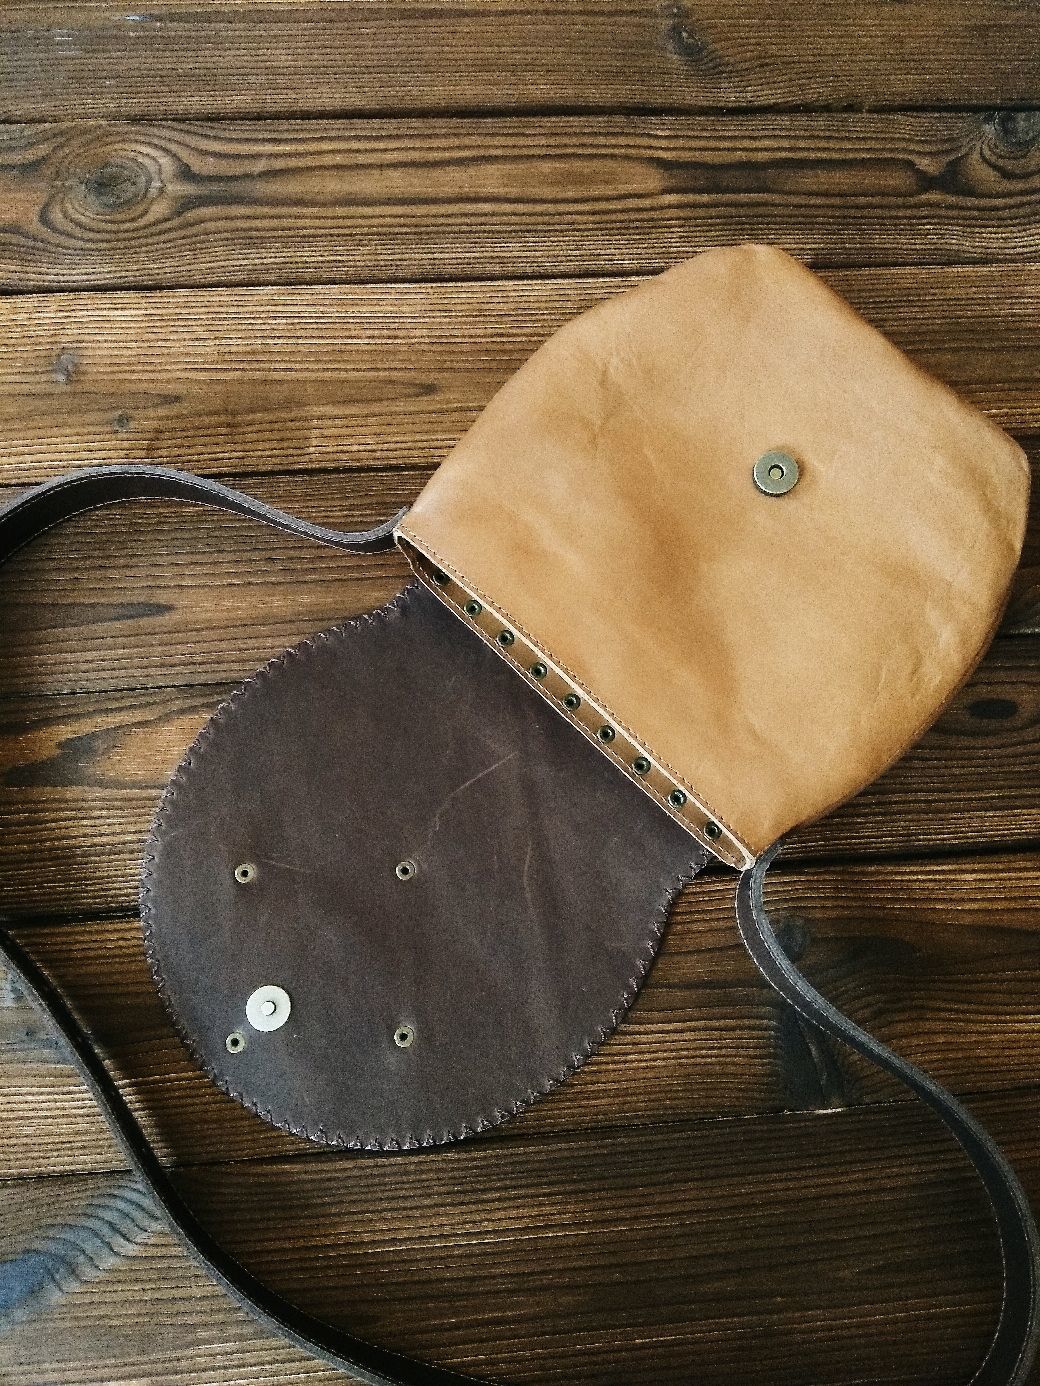 Bag made of genuine leather in the boho style&quot; Byron Bay &quot; sand – заказать на Ярмарке Мастеров ...